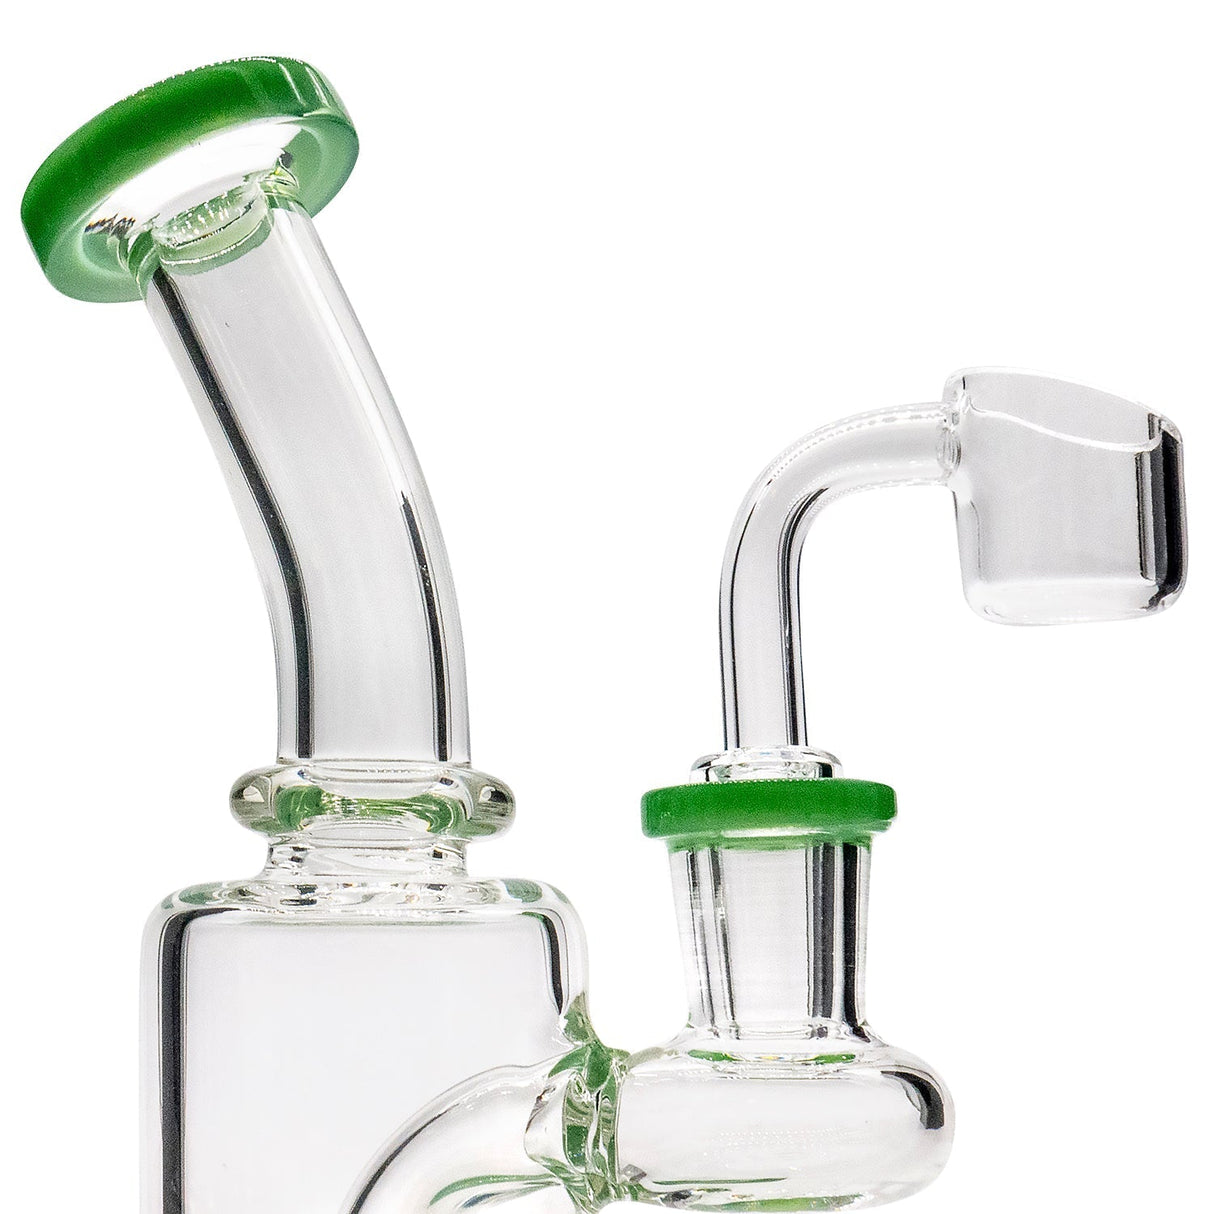 Glassic's "Spritz" 6.5" Dab Rig with Green Shower-head Perc and Banger Close-up